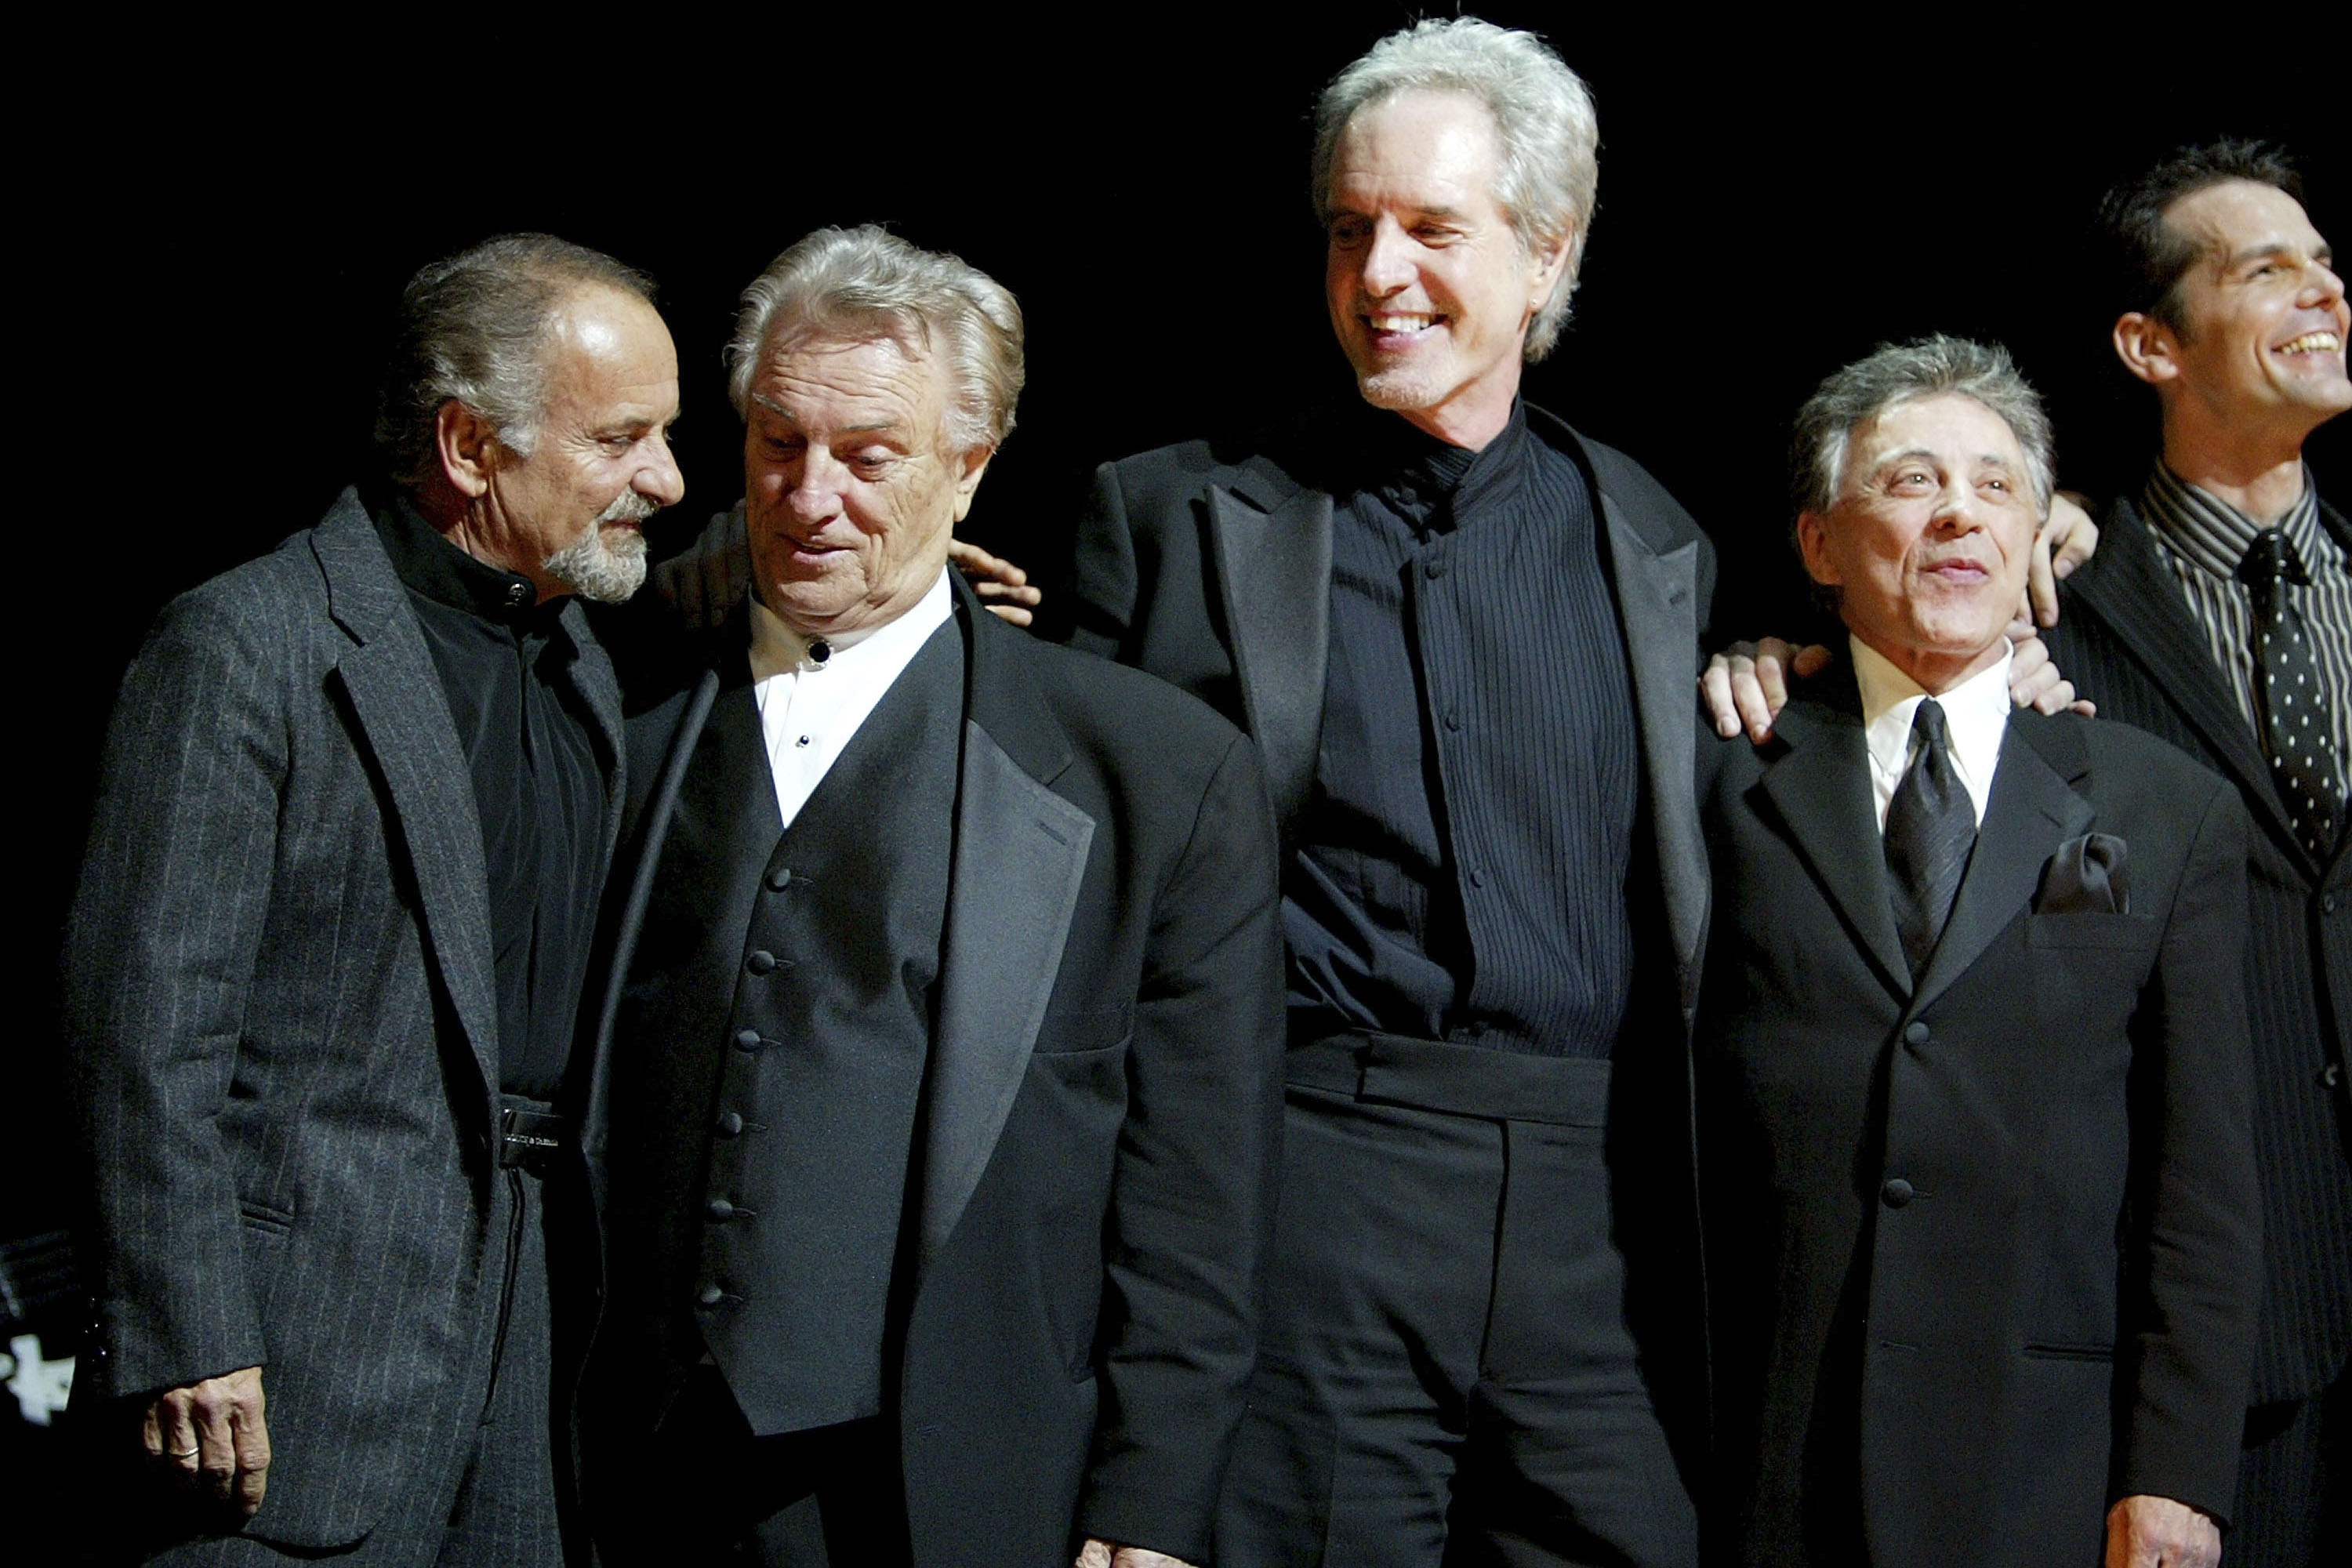 (L to R) Actor Joe Pesci joins Tommy DeVito, Bob Gaudio and Frankie Valli of Frankie Valli and the Four Seasons onstage during the curtain call at the play opening night of 